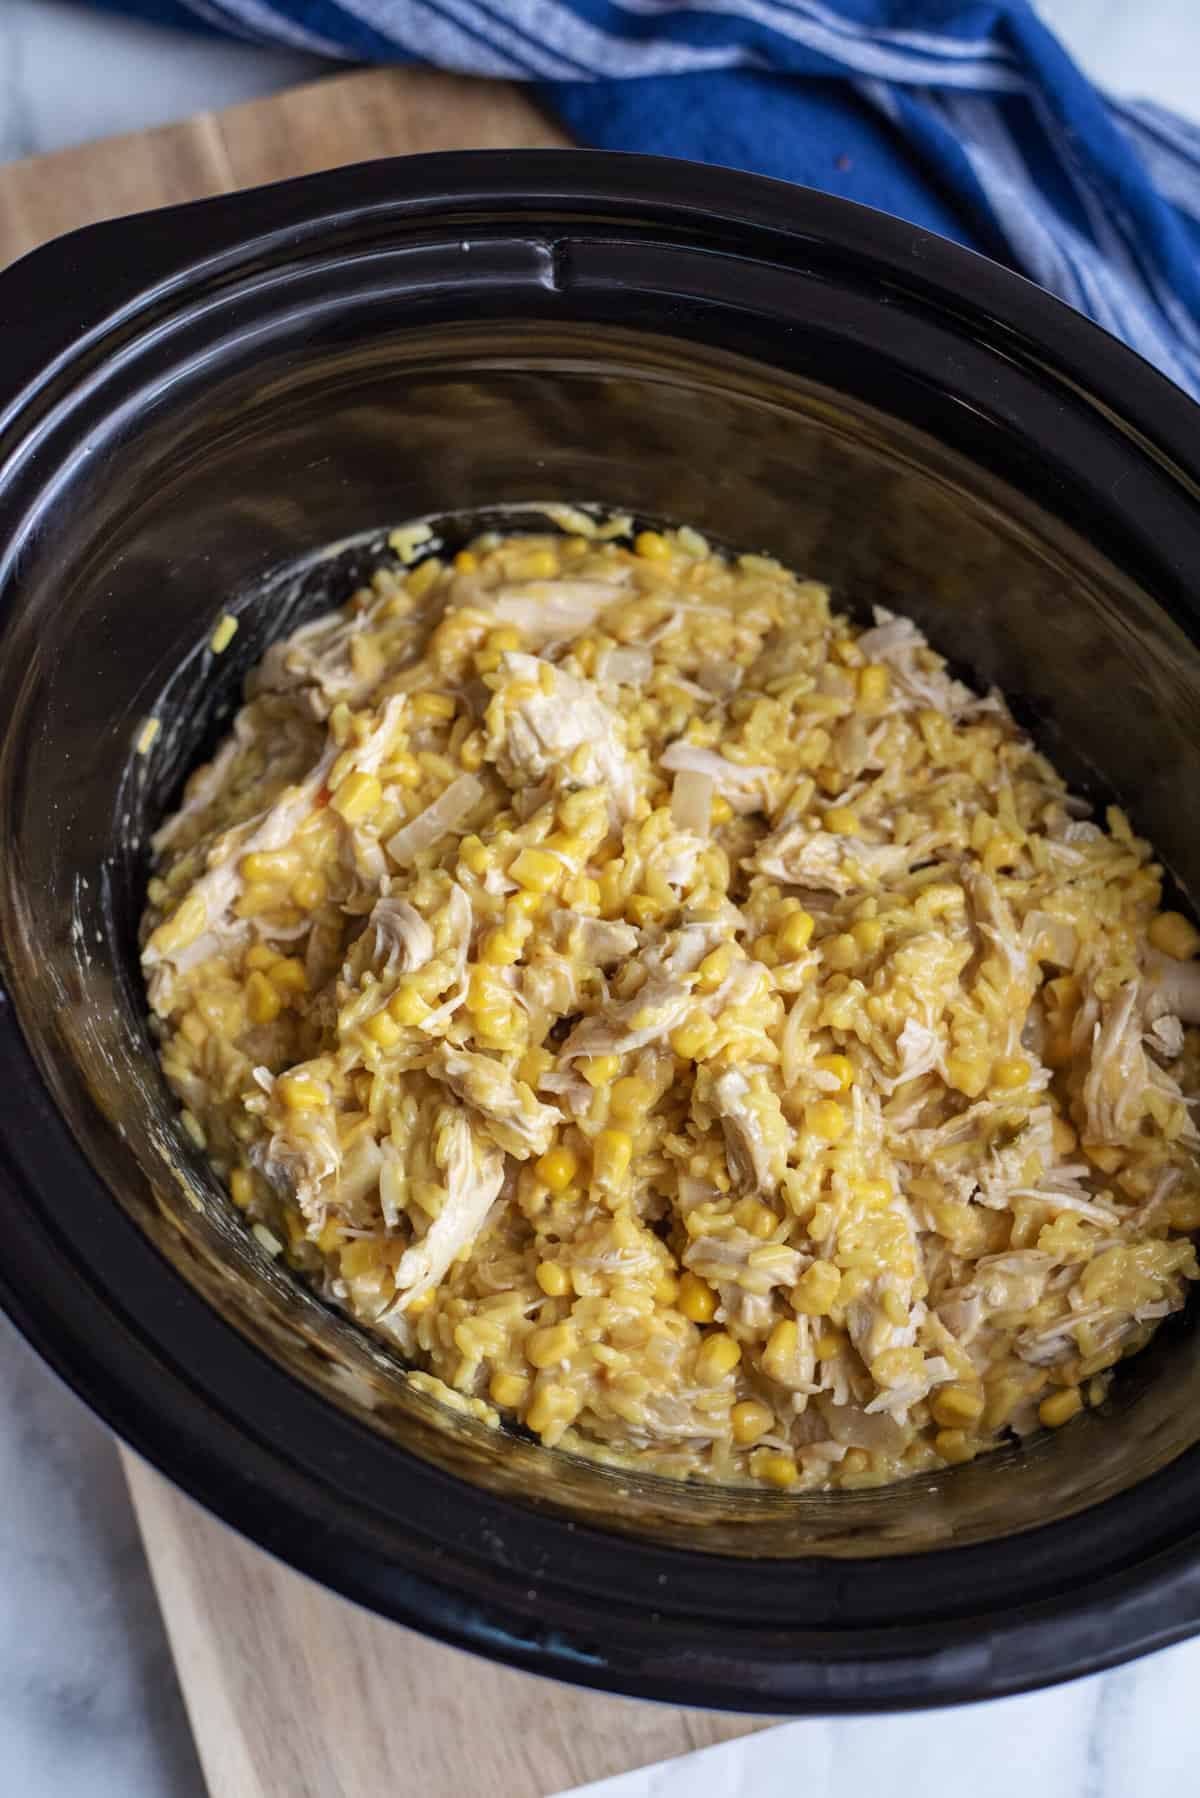 Mix ingredients in slow cooker together.